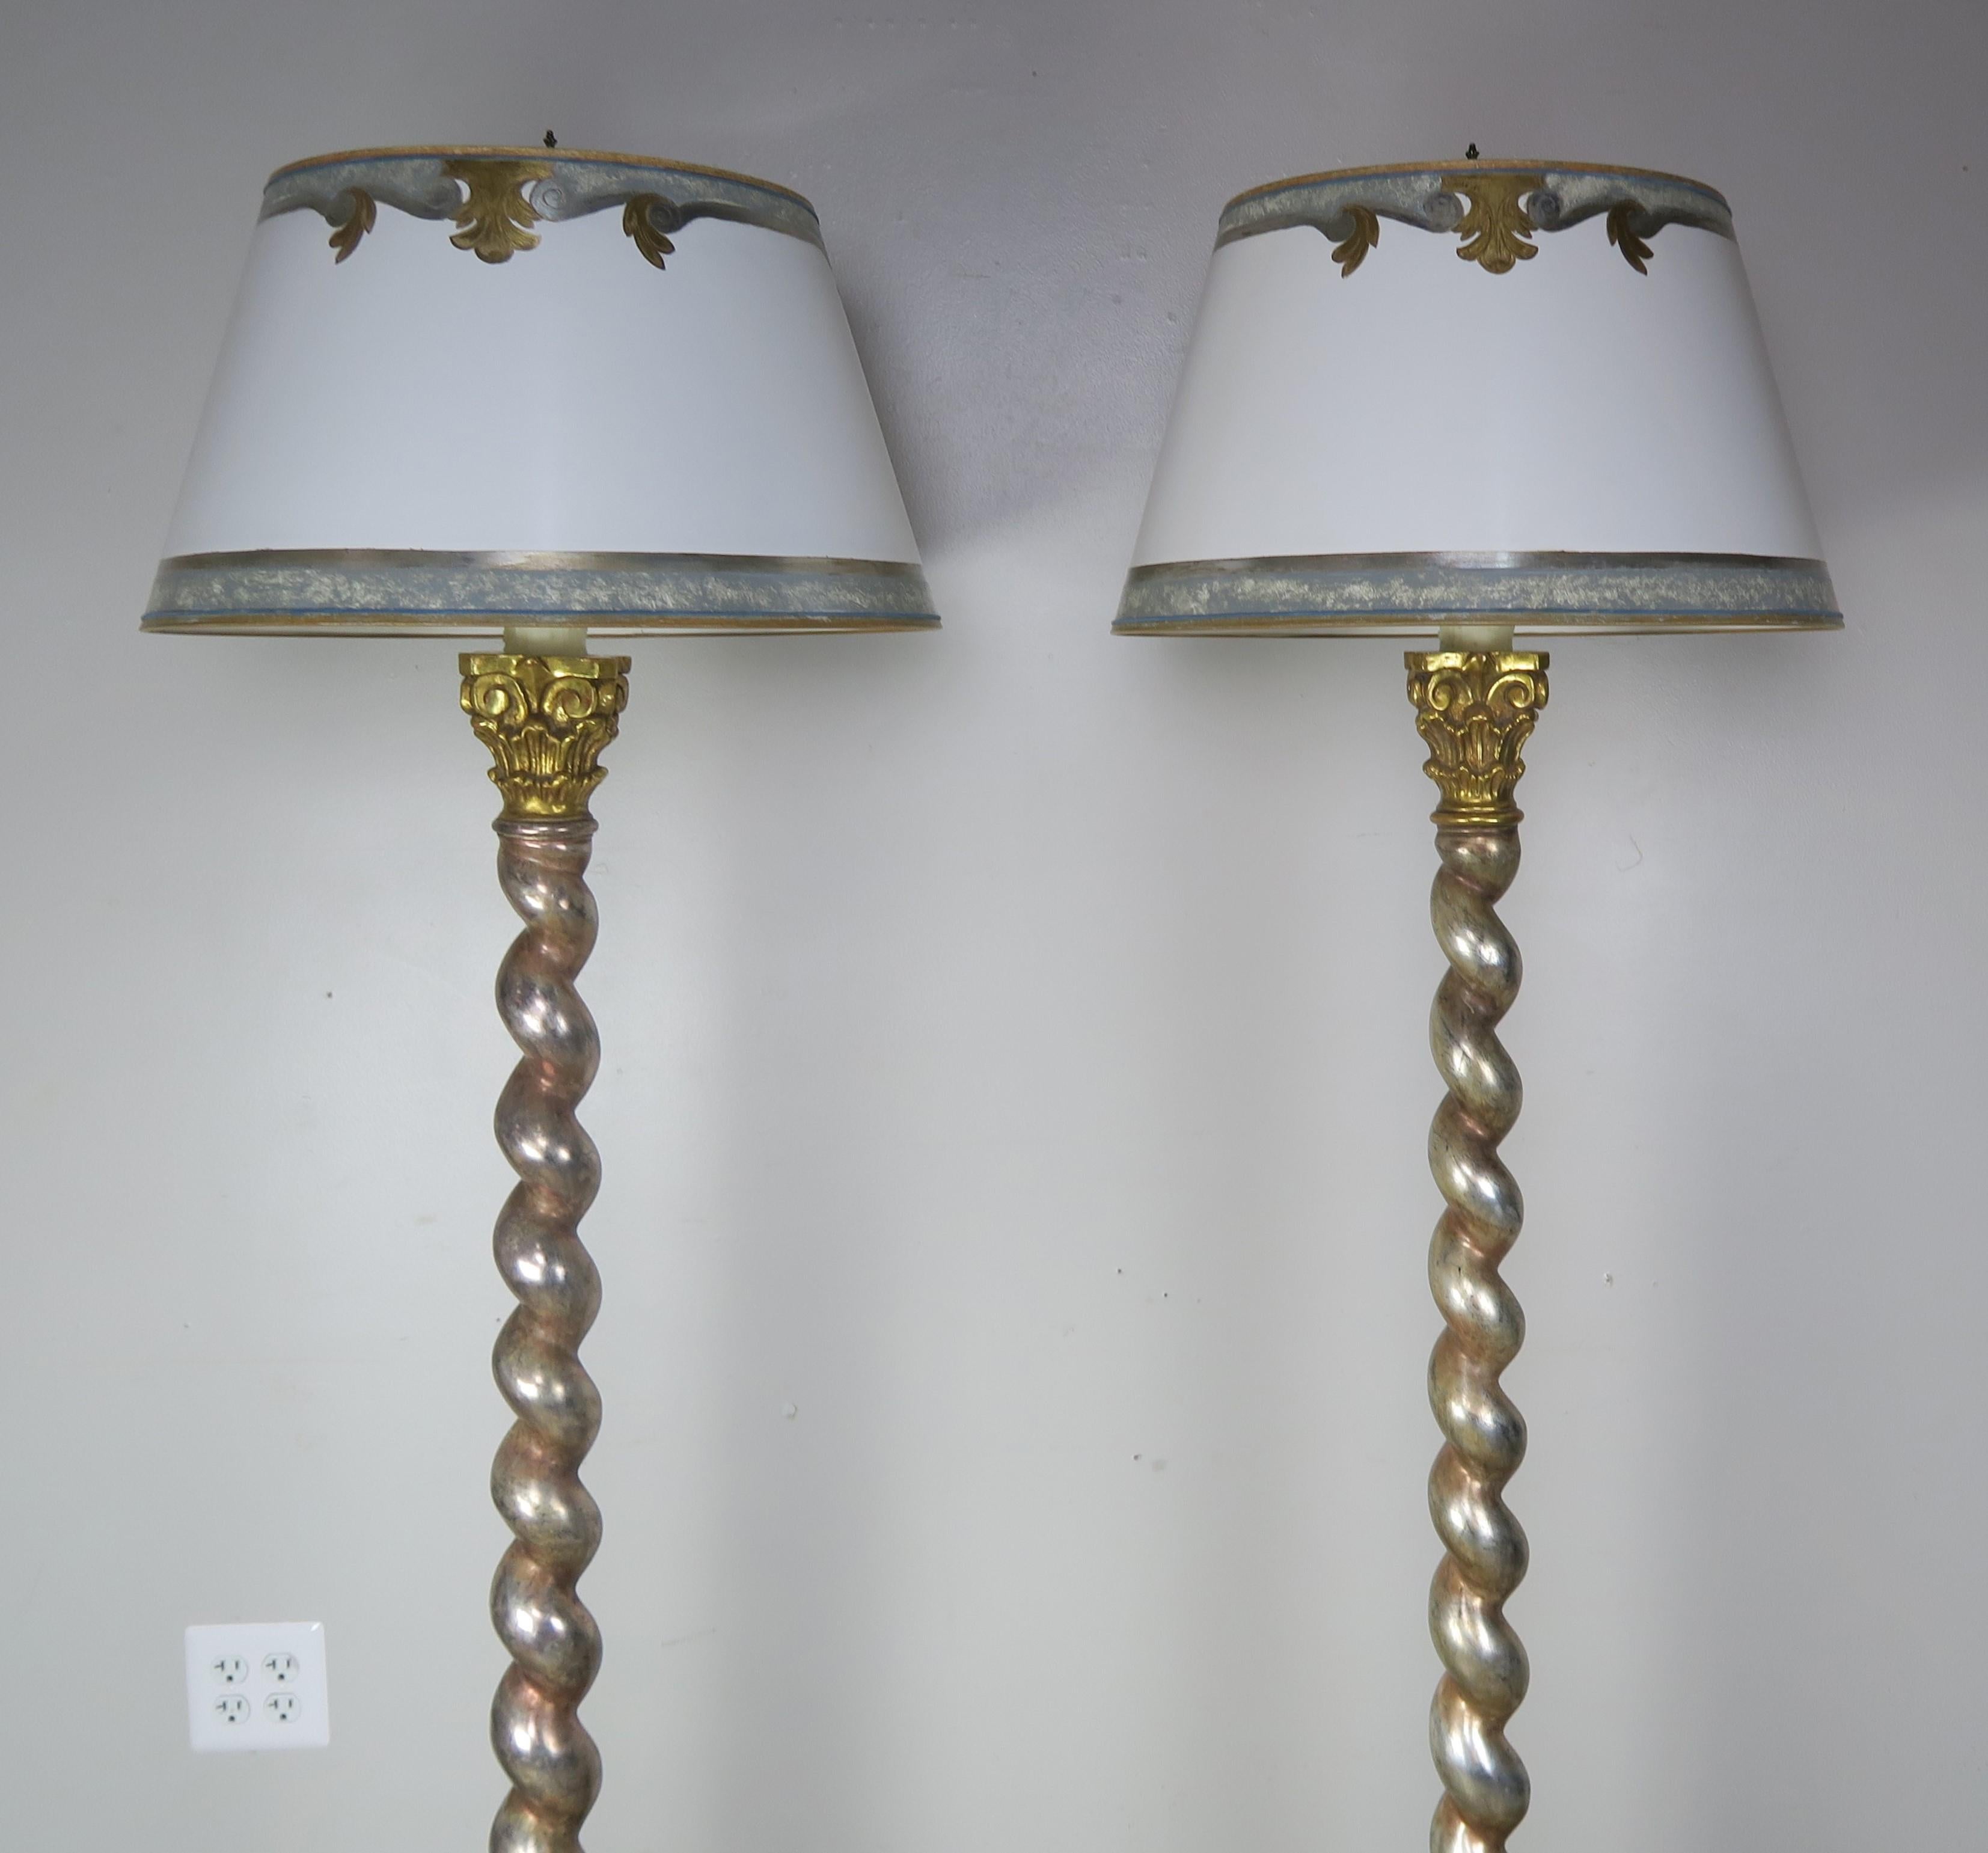 Pair of Italian twisted barley silver and gold leaf gilt standing lamps newly re-wired and crowned with hand painted parchment shades. The lamps are newly rewired with drip wax candles. Ready to install.